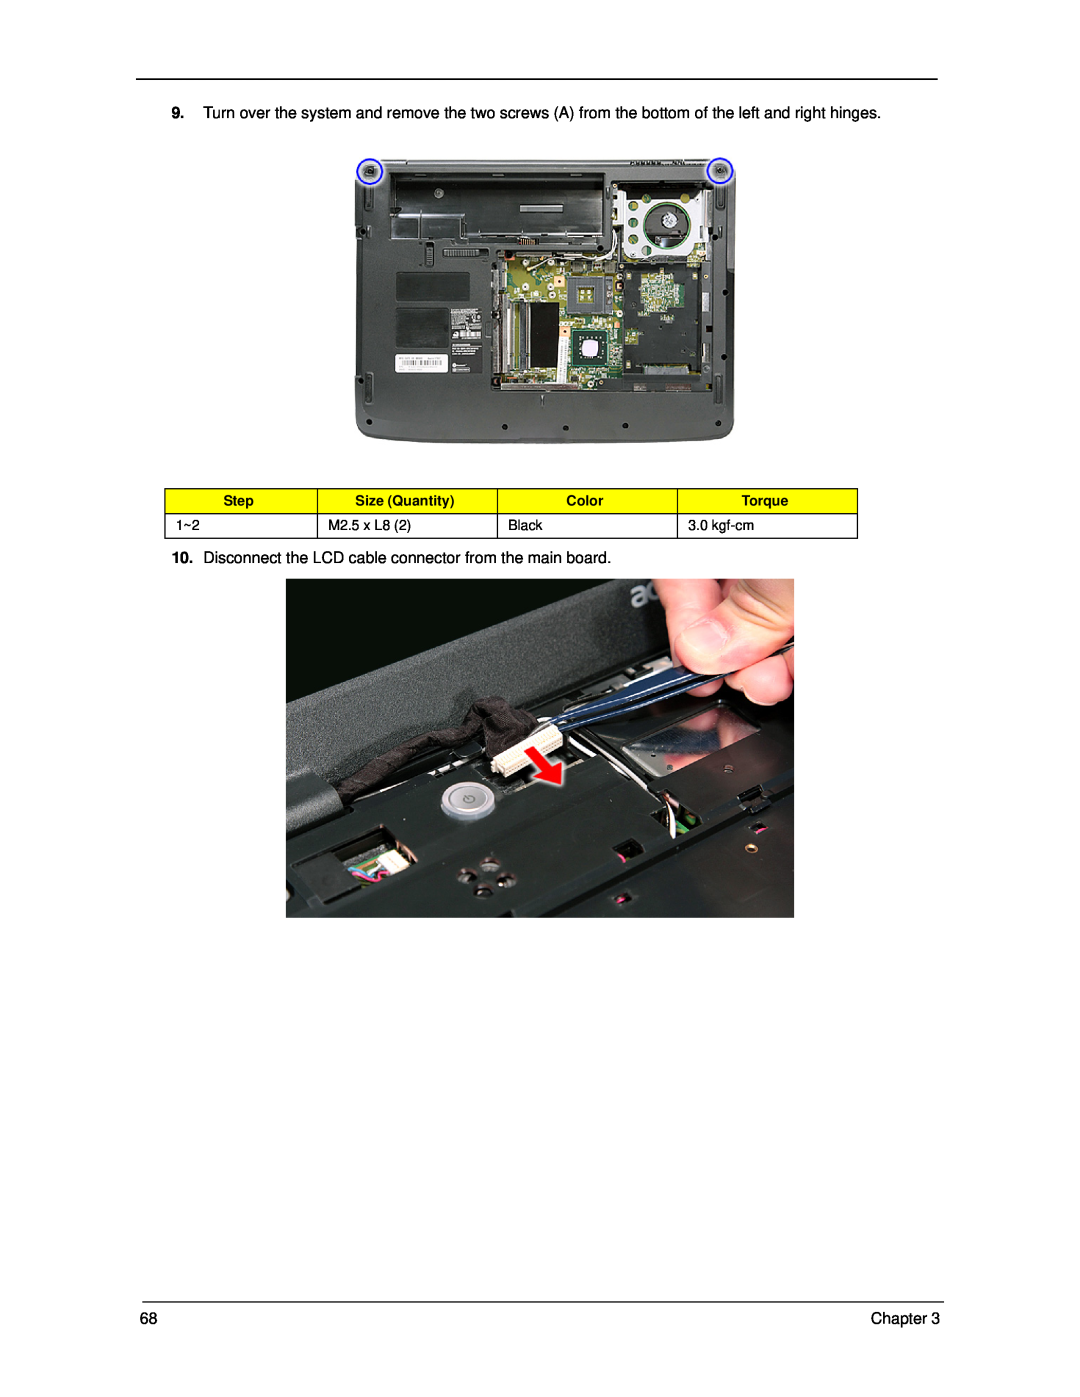 Acer 5330 manual Disconnect the LCD cable connector from the main board, Step, Size Quantity, Color, Torque 